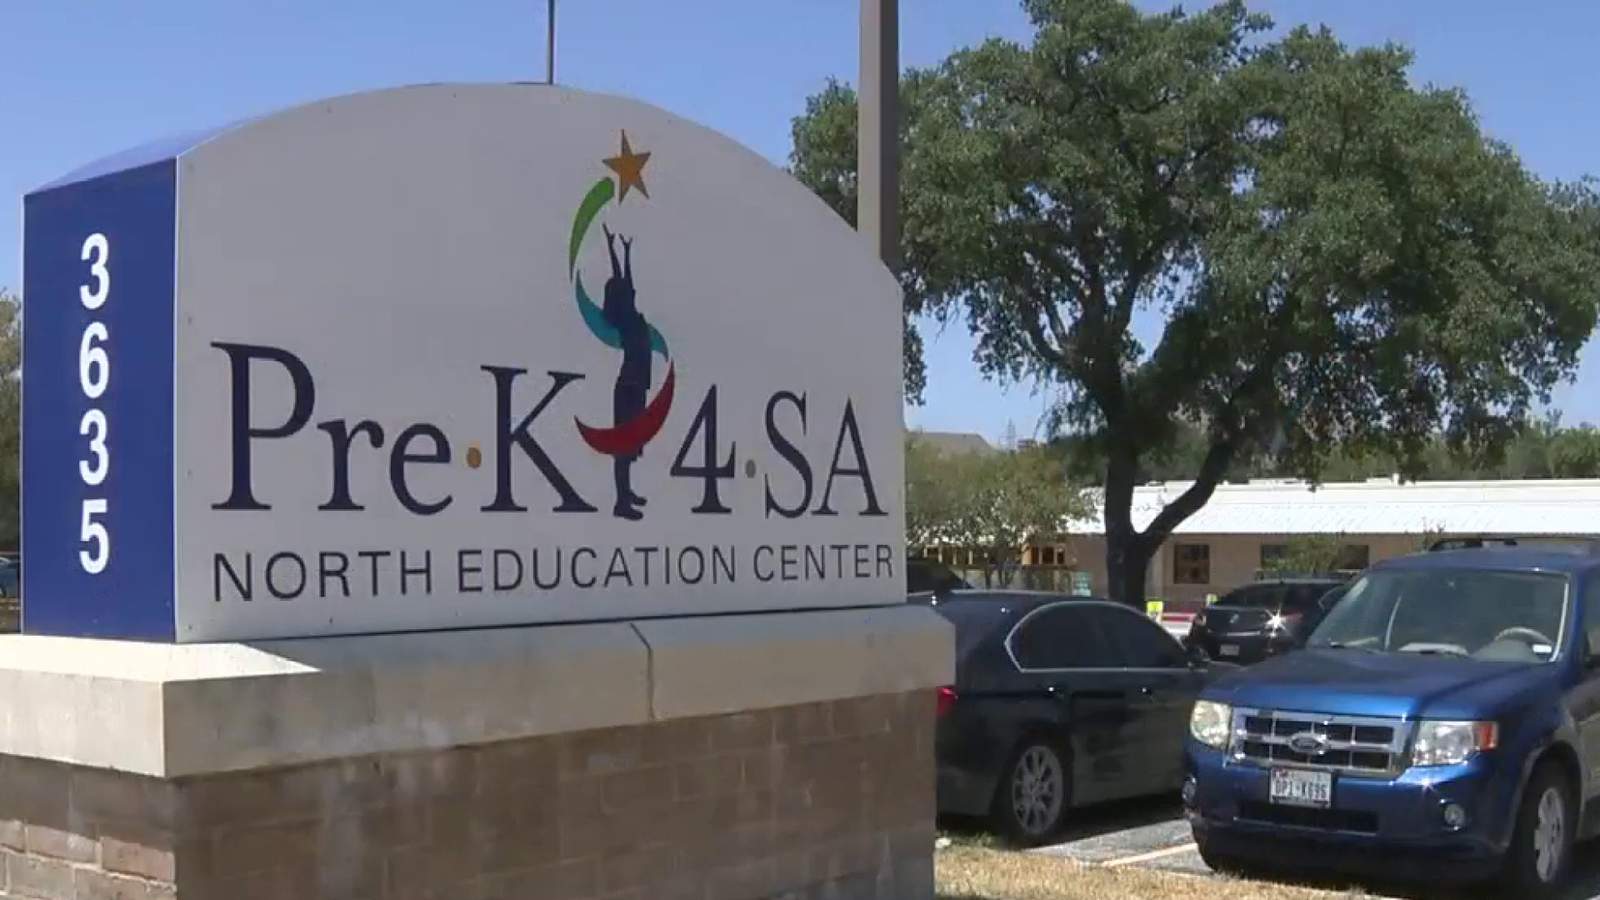 No additional positive COVID-19 cases among Pre-K 4 SA East Education Center staff, officials say